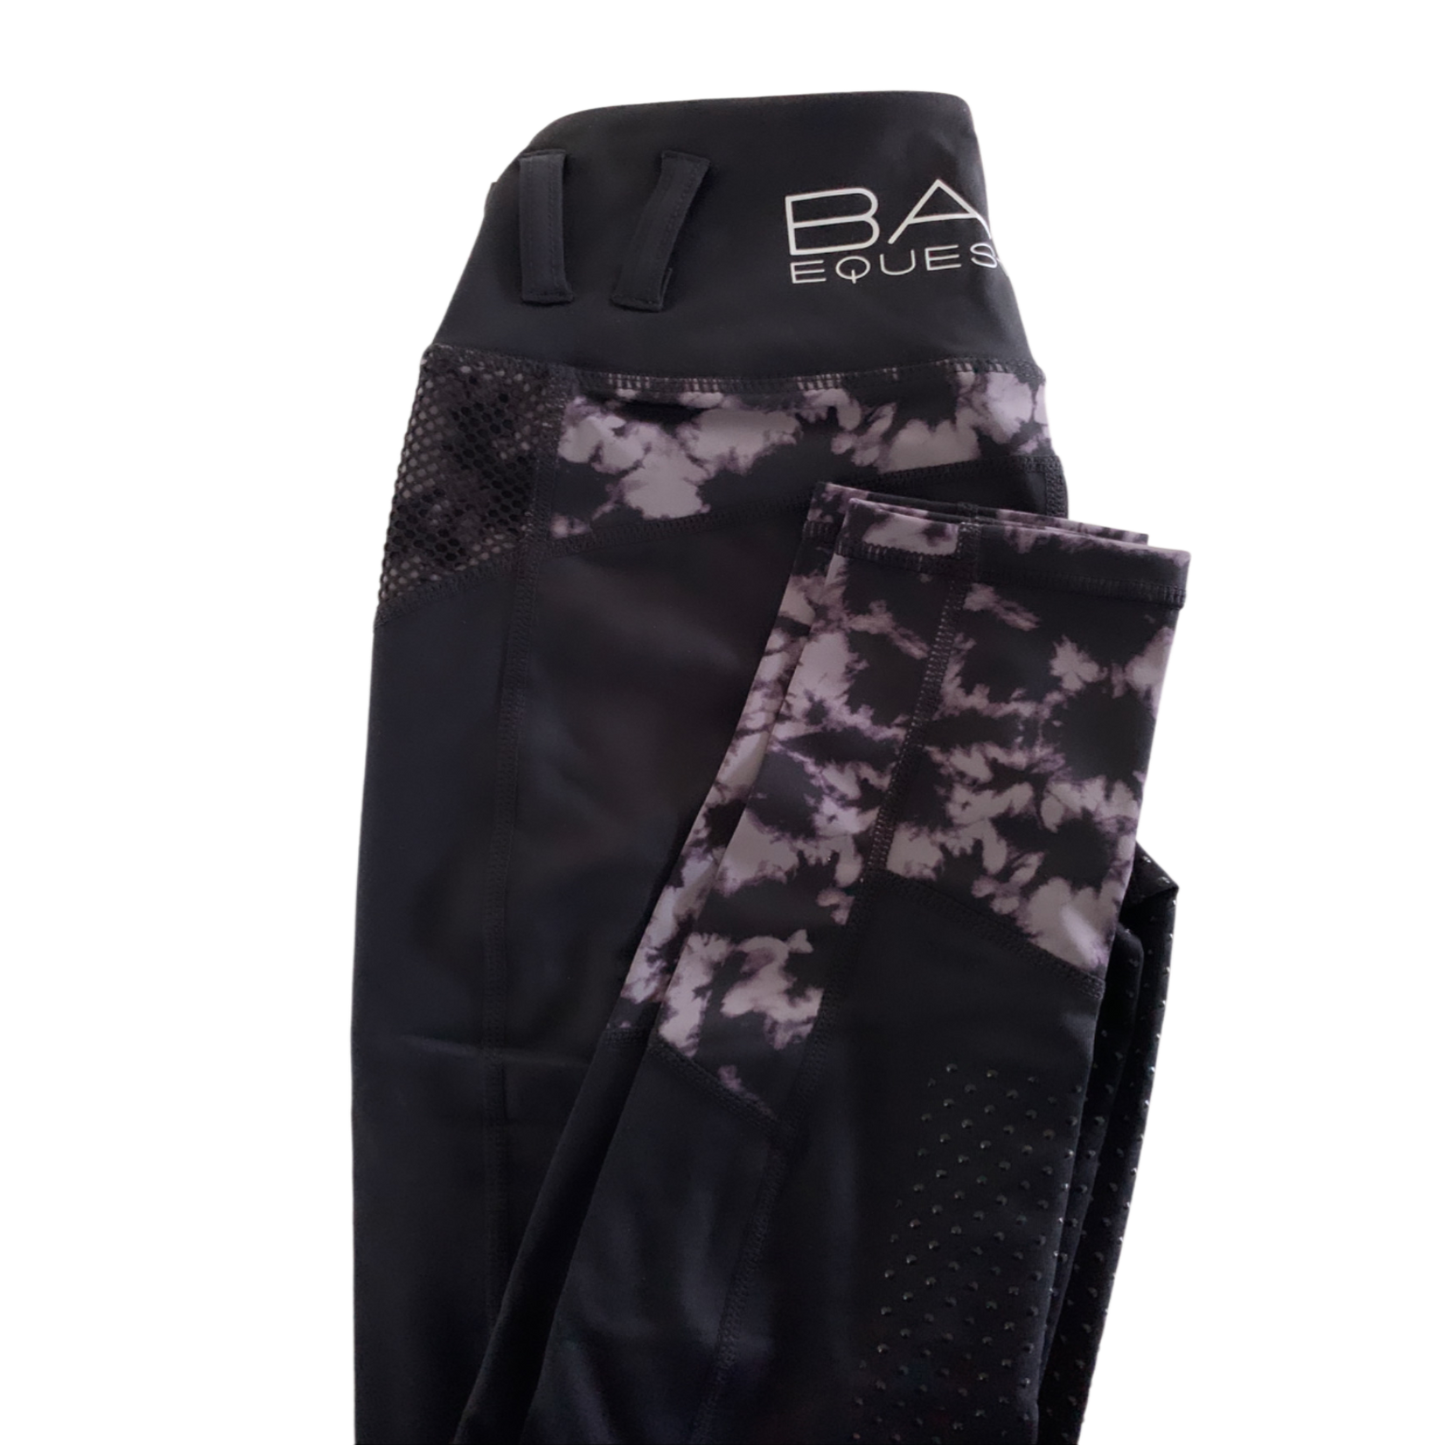 Black and gray camo-patterned horse riding tights on a black background.